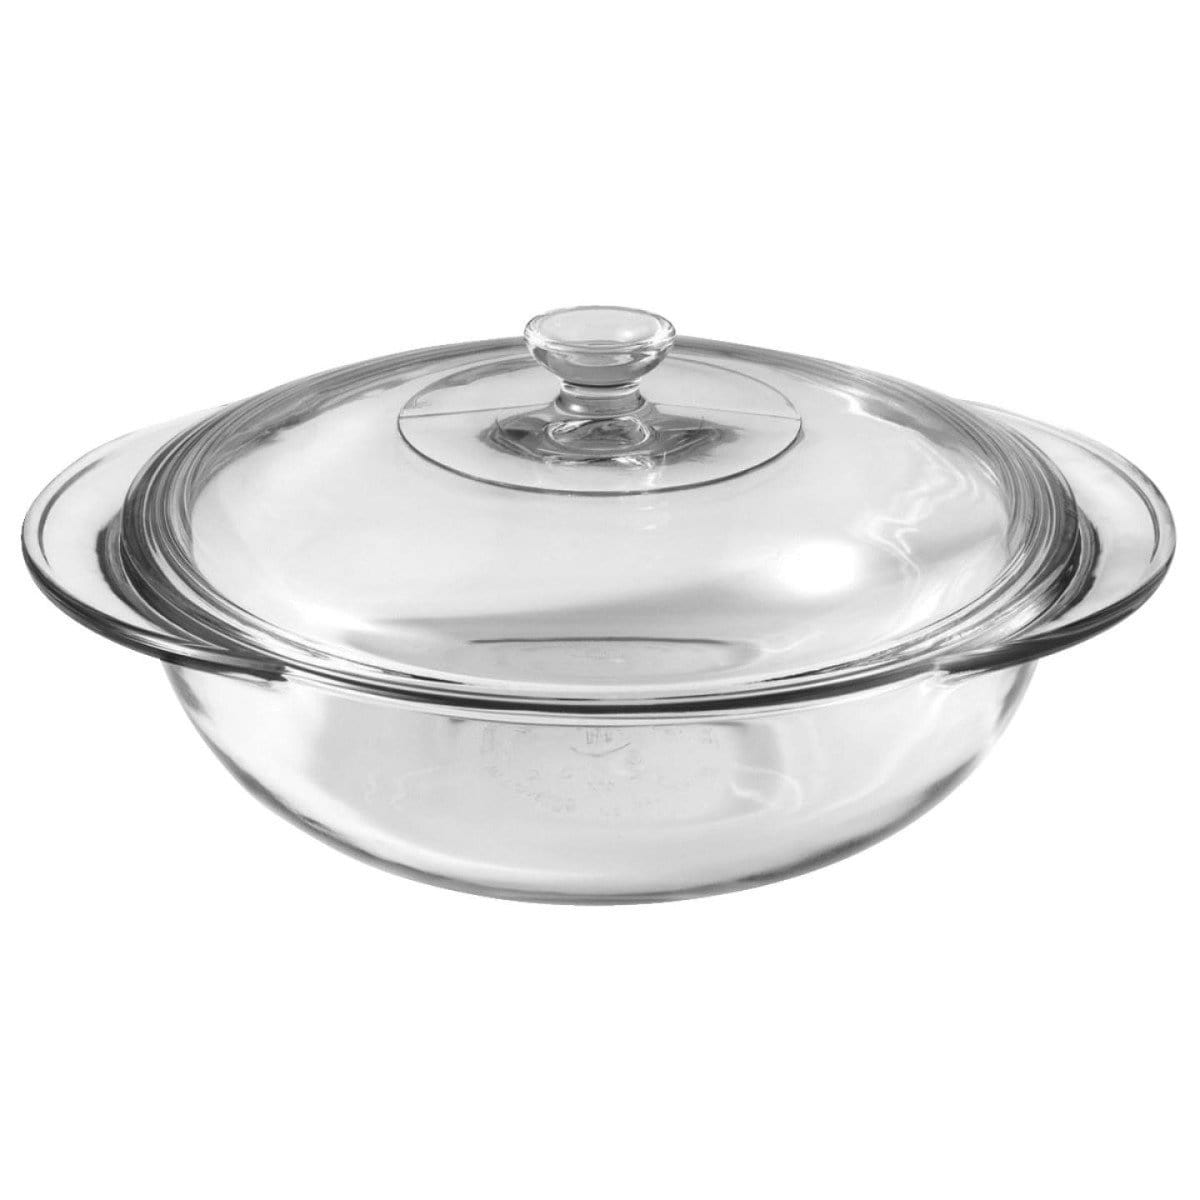 https://cdn.shopify.com/s/files/1/0474/2338/9856/products/anchor-hocking-anchor-hocking-oven-basics-2-qt-round-covered-casserole-dish-076440819328-19972380524704_1600x.jpg?v=1628086841